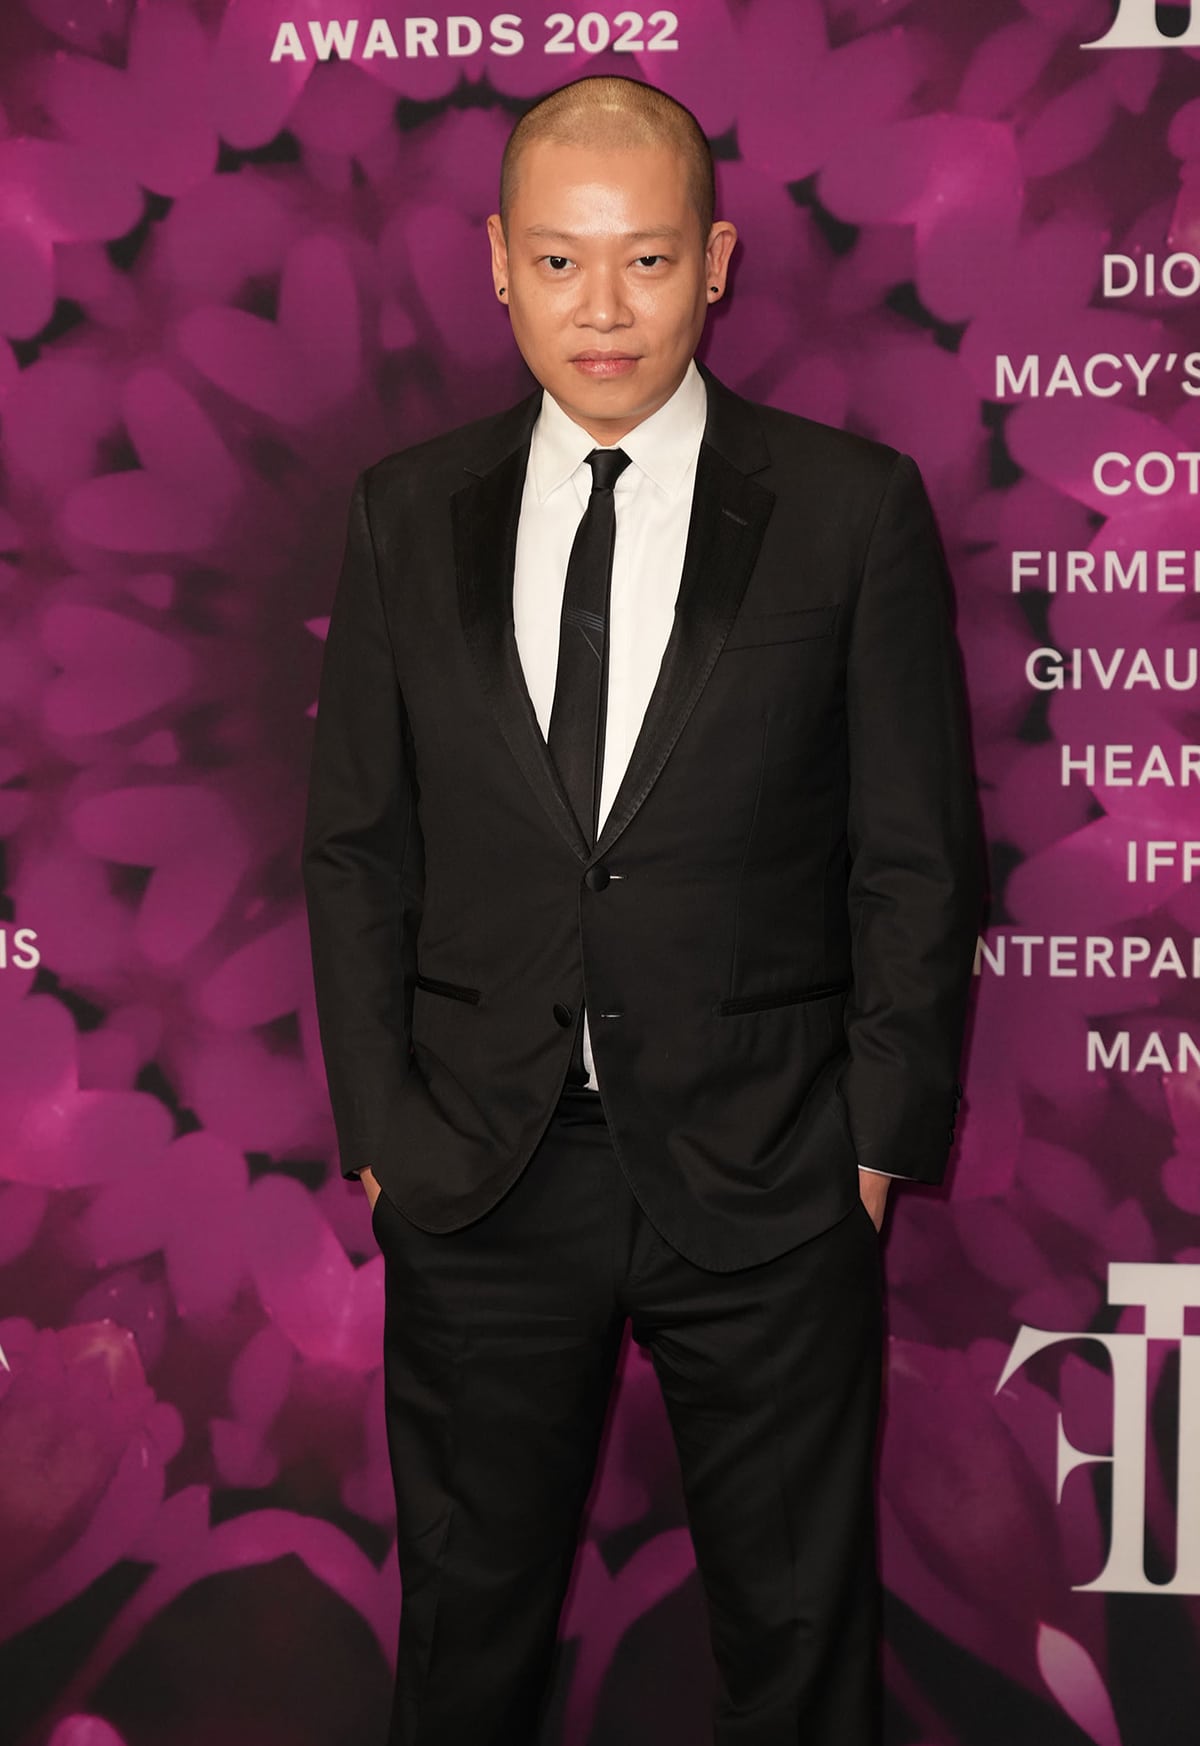 Jason Wu is a Taiwanese-Canadian artist and fashion designer based in New York City